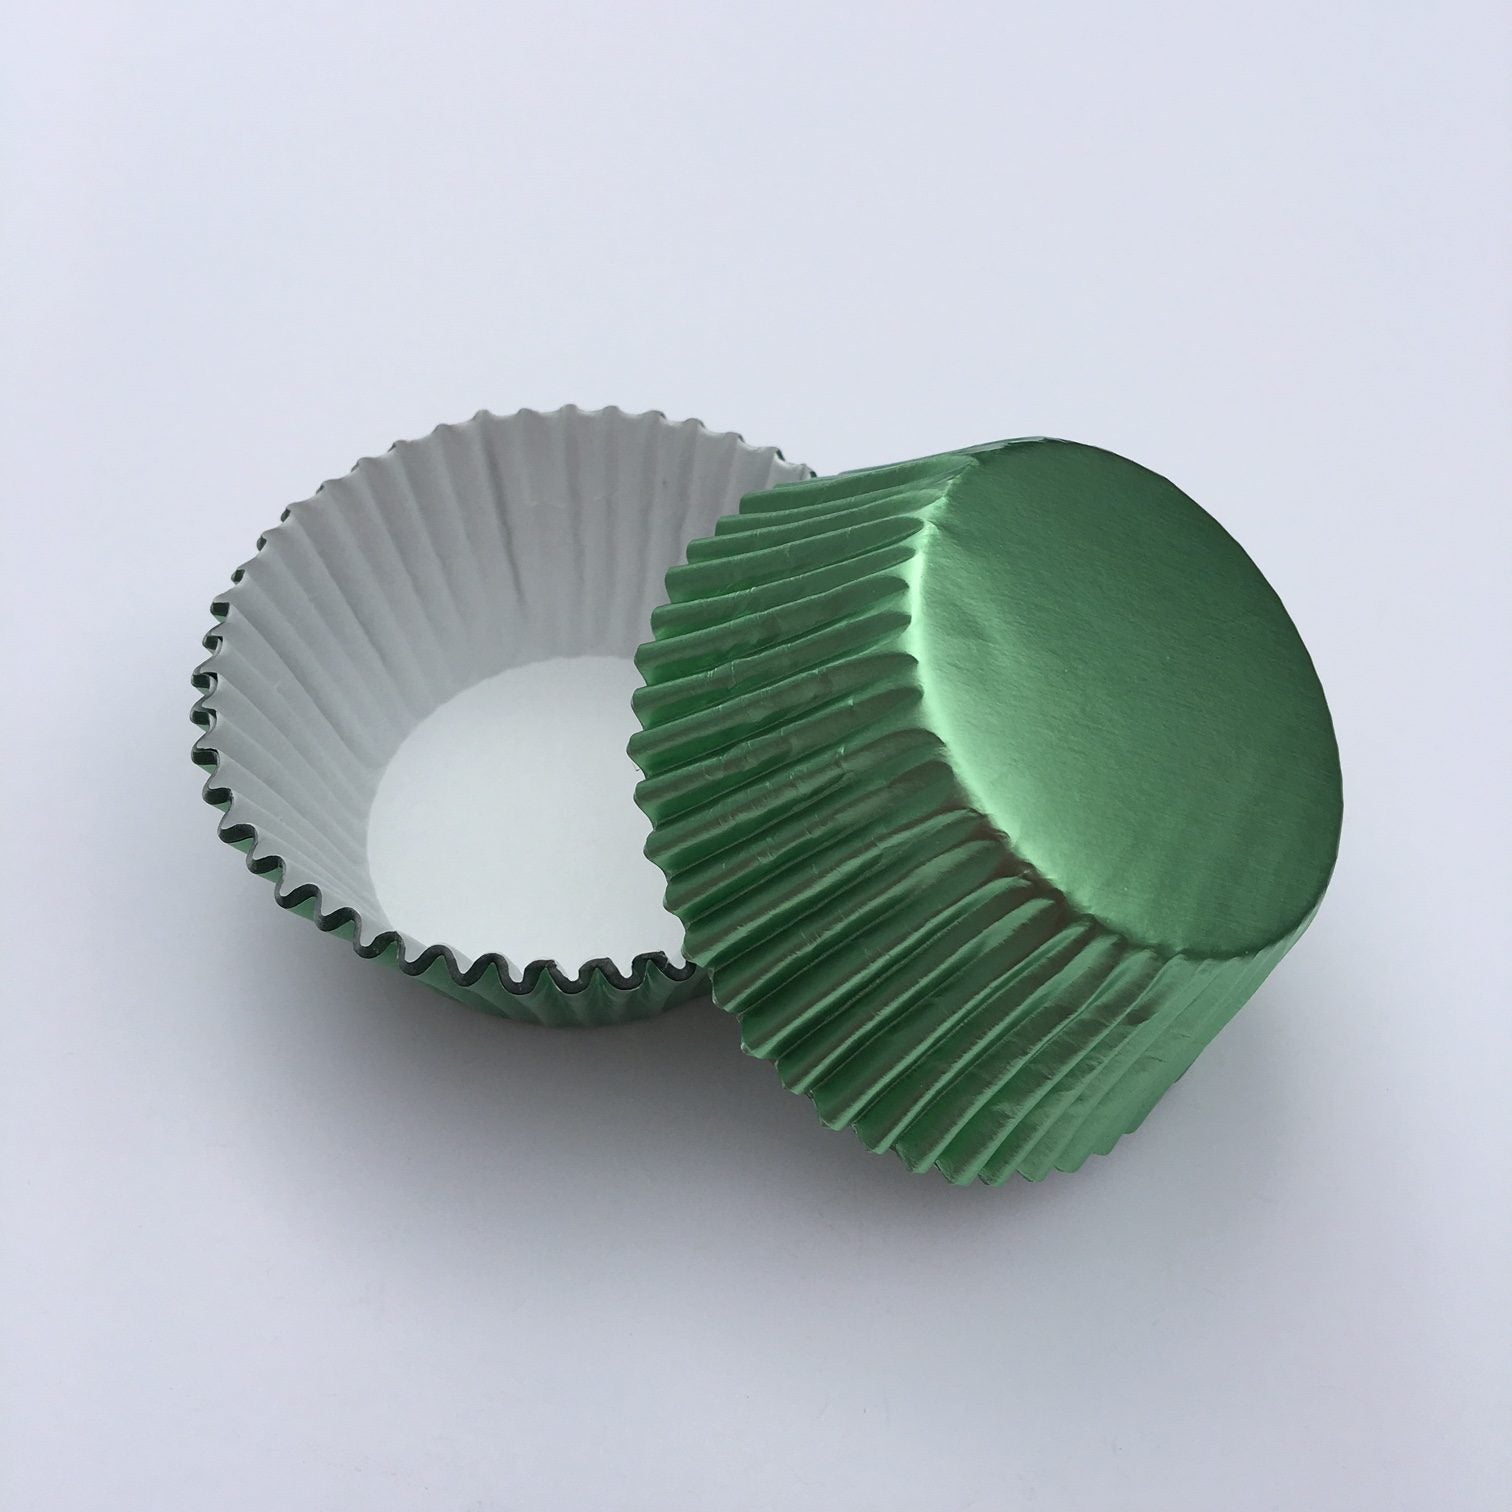 Light Green Foil Baking Cups - 50ish Cupcake Liners